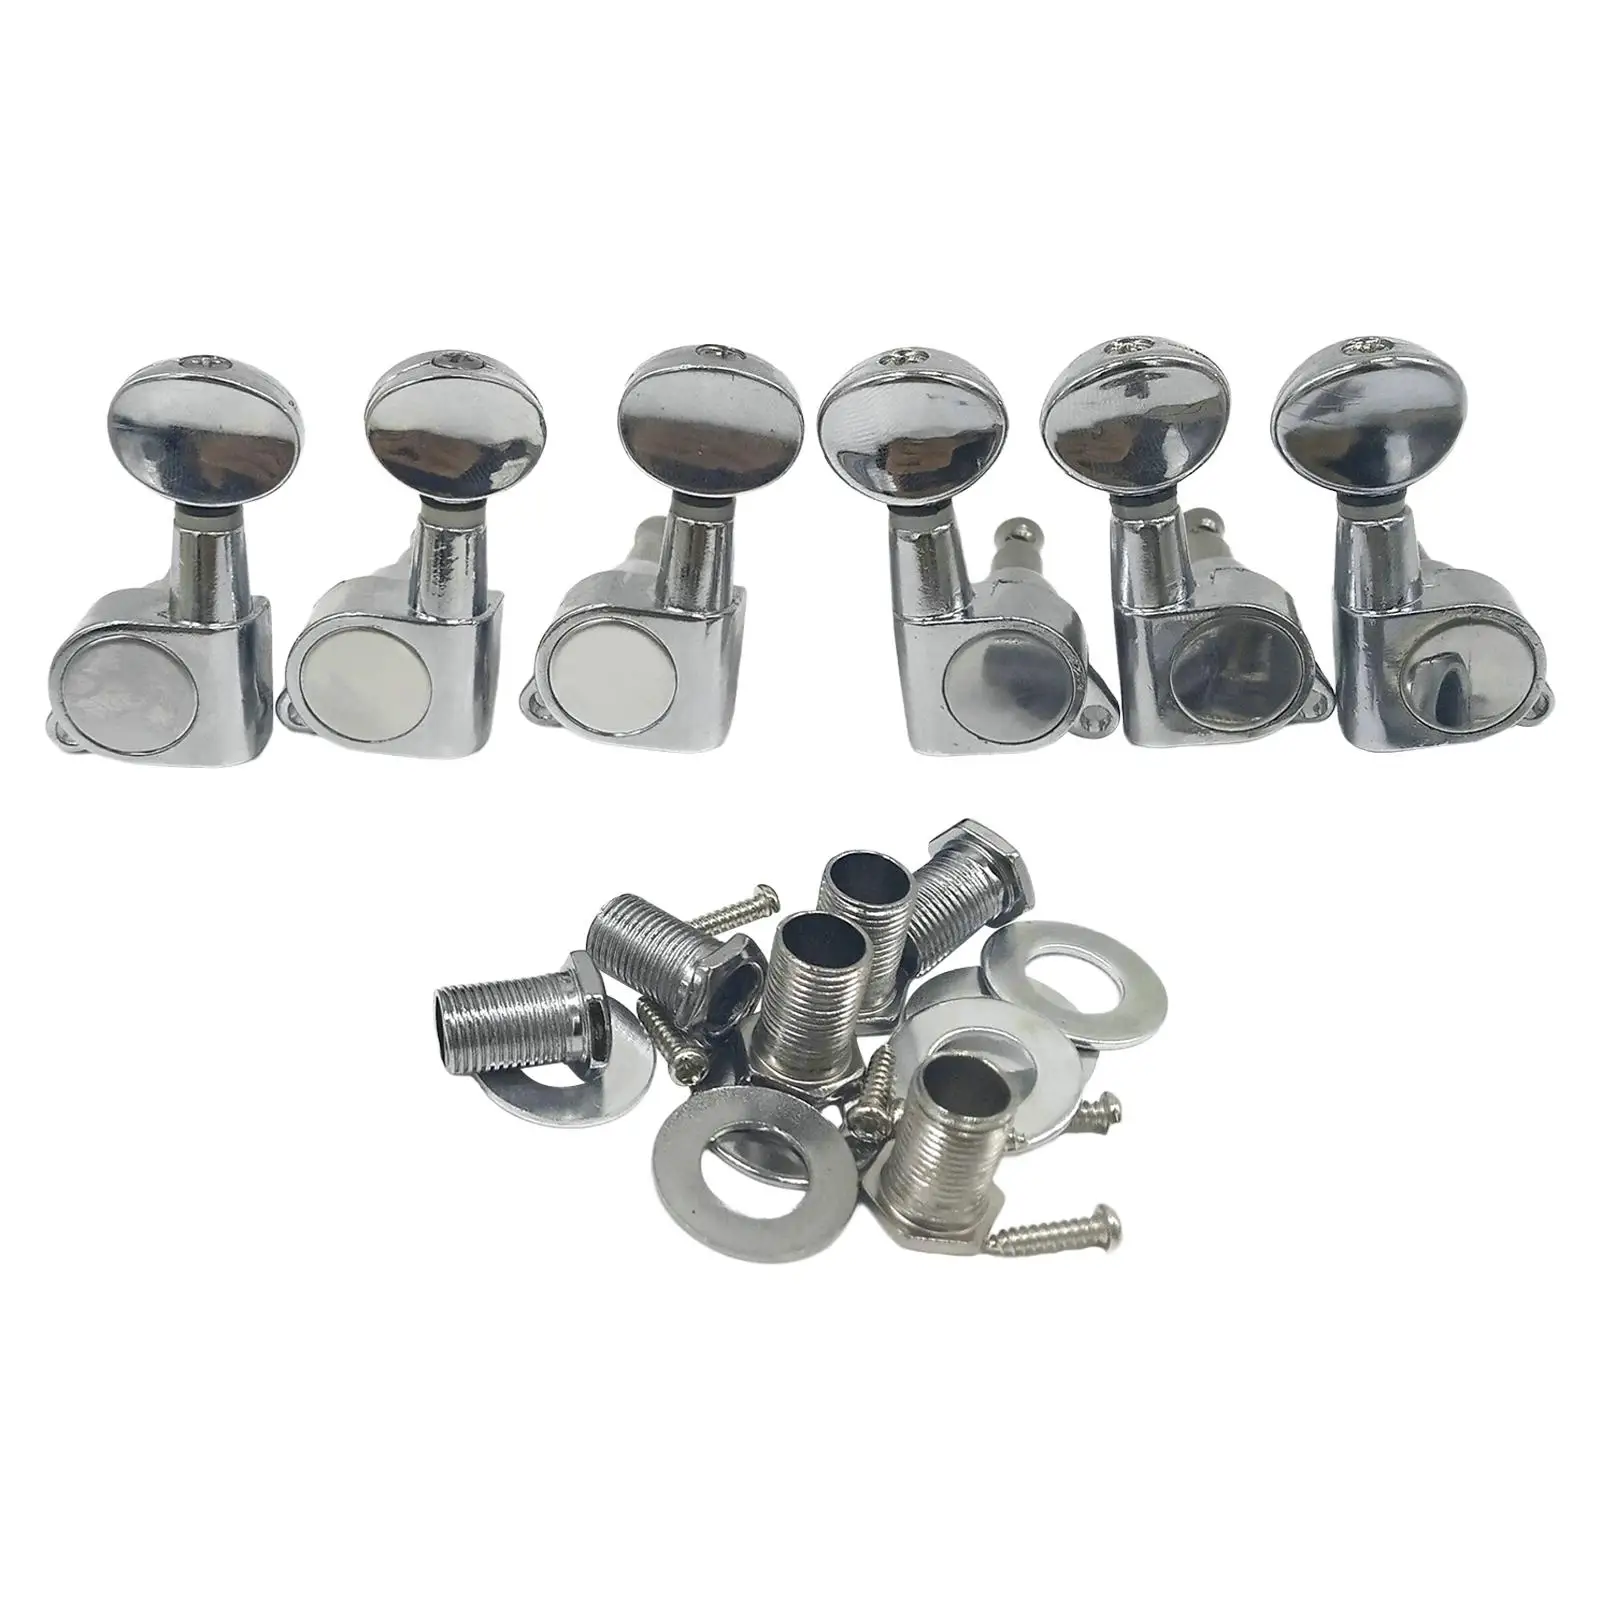 6x Guitar Tuning Peg Tuner Key Peg Knobs Tuners with Nuts Gaskets Machine Head for Acoustic Electric Guitar Replacement Parts